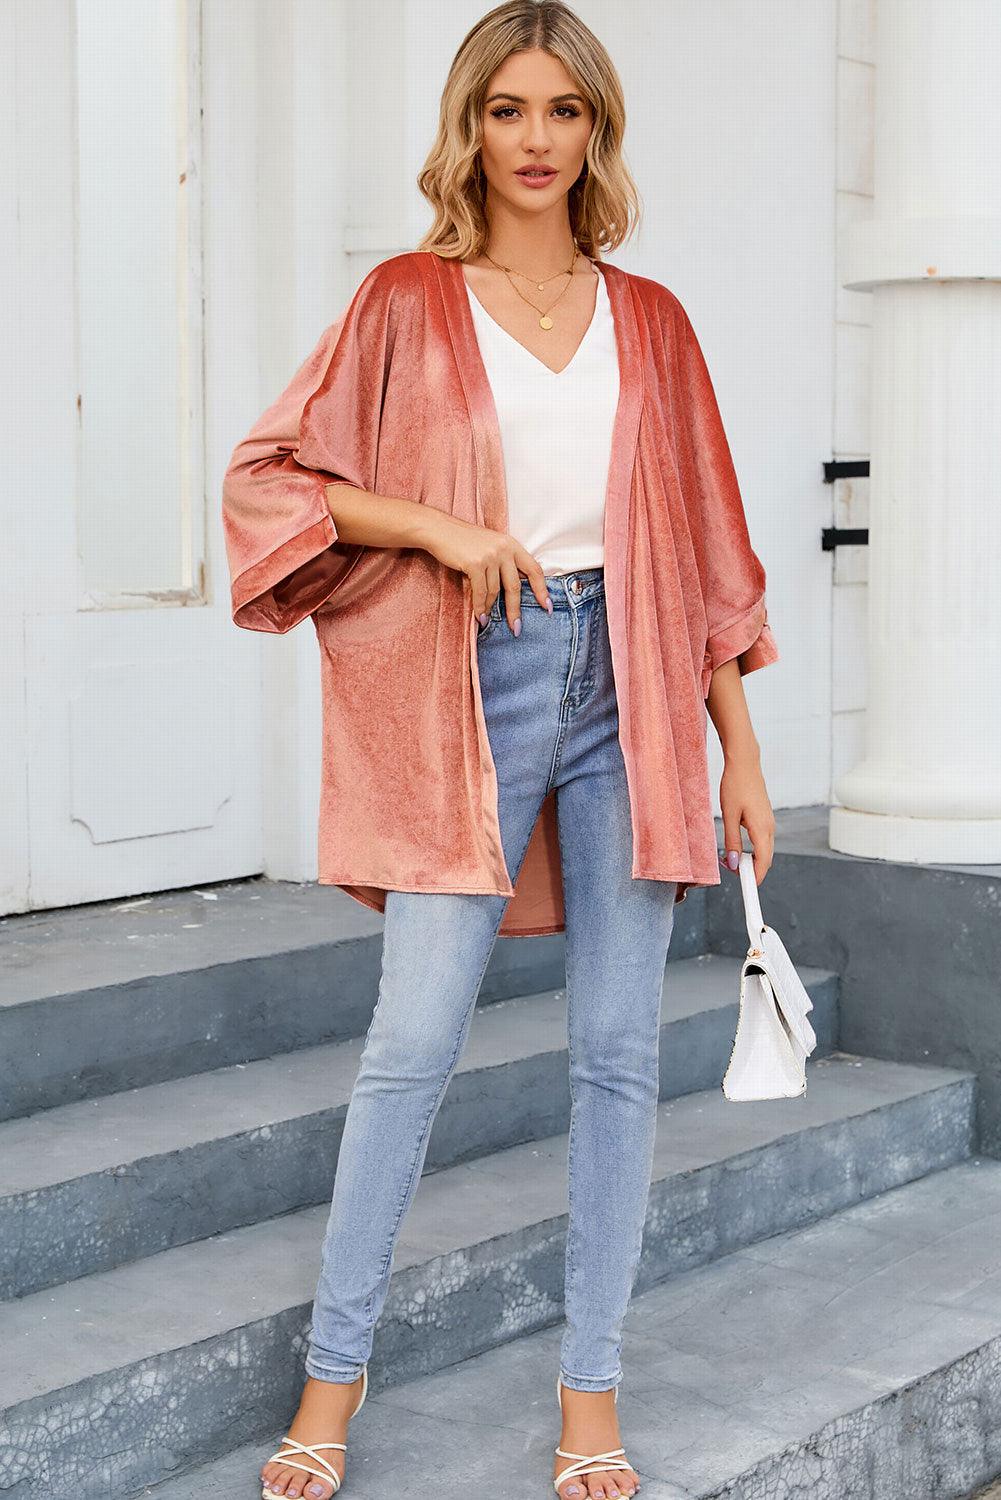 Shop Stylish 3/4 Sleeve Cardigan: Perfect for Any Occasion